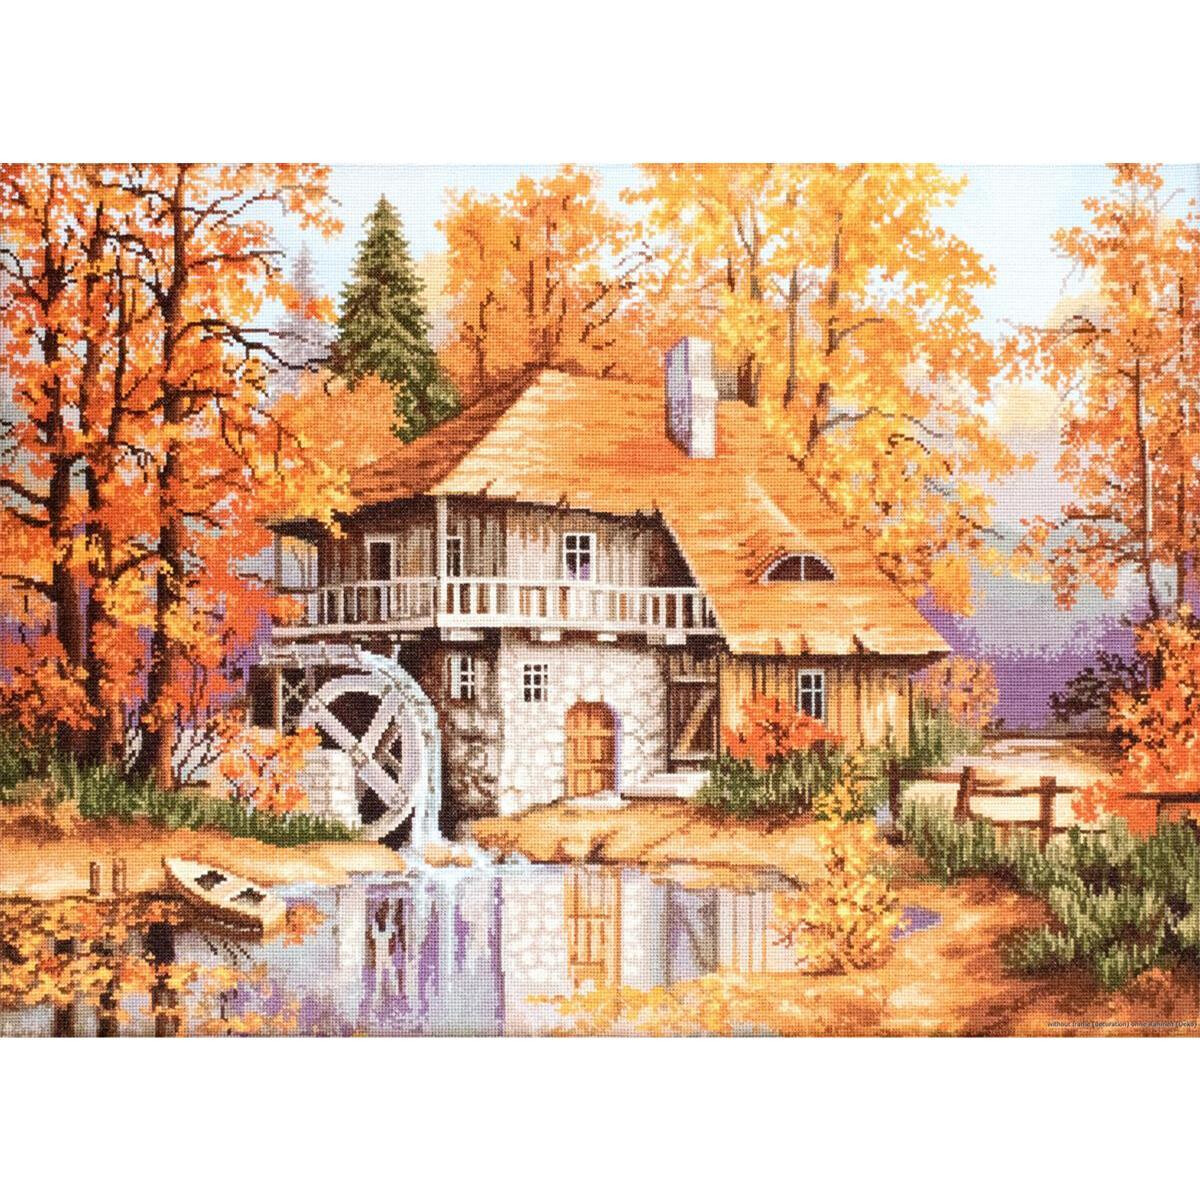 A picturesque fall scene featuring a charming stone house...